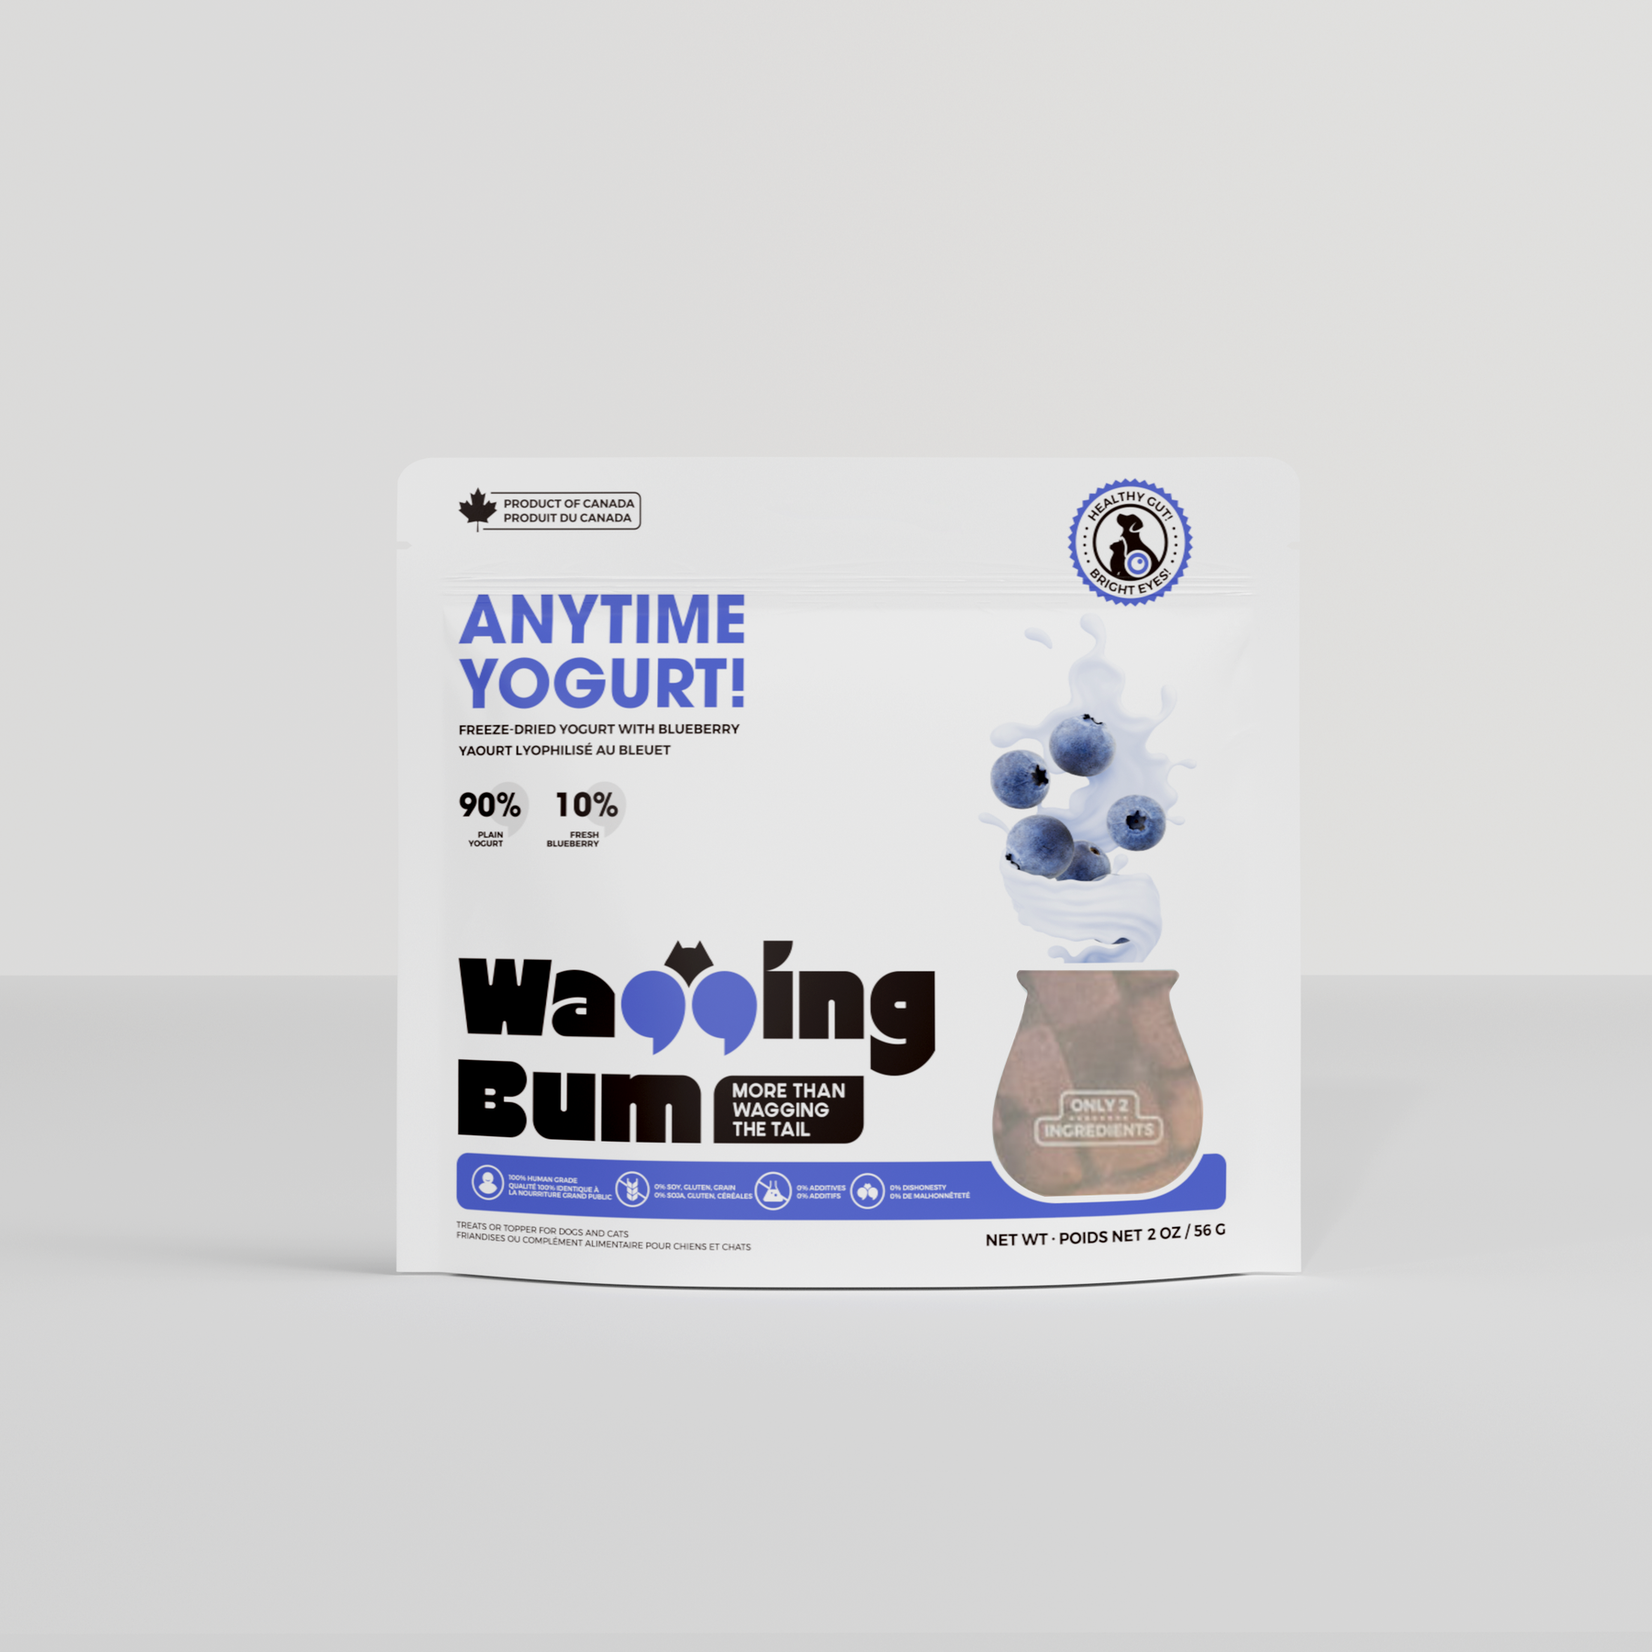 Wagging Bum - Anytime Yogurt! with Blueberry